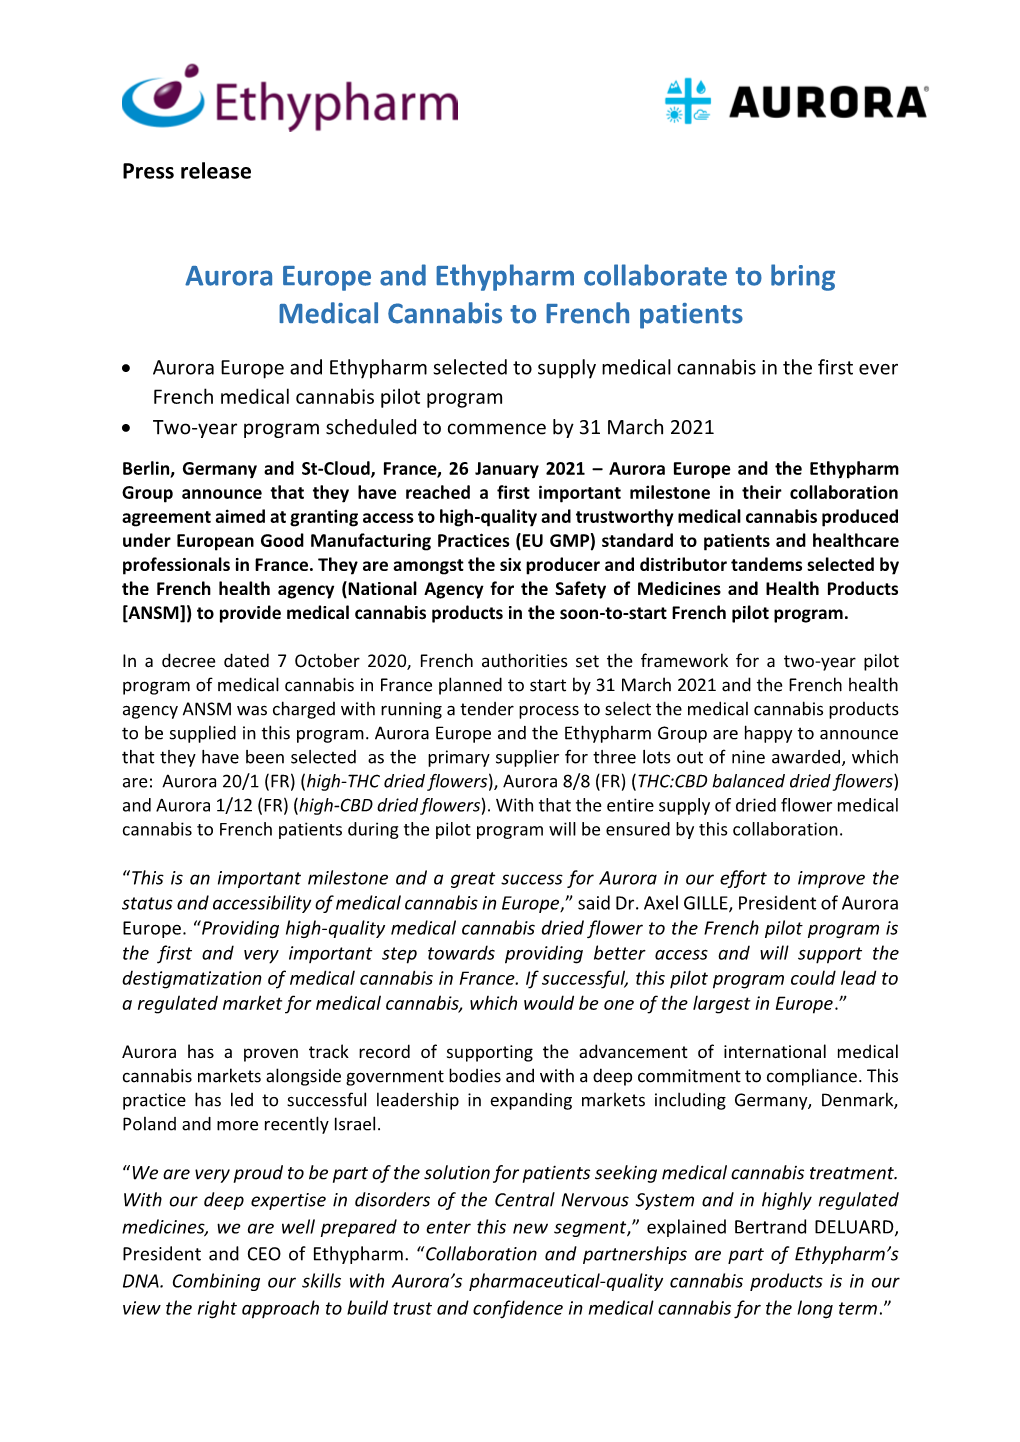 Aurora Europe and Ethypharm Collaborate to Bring Medical Cannabis to French Patients